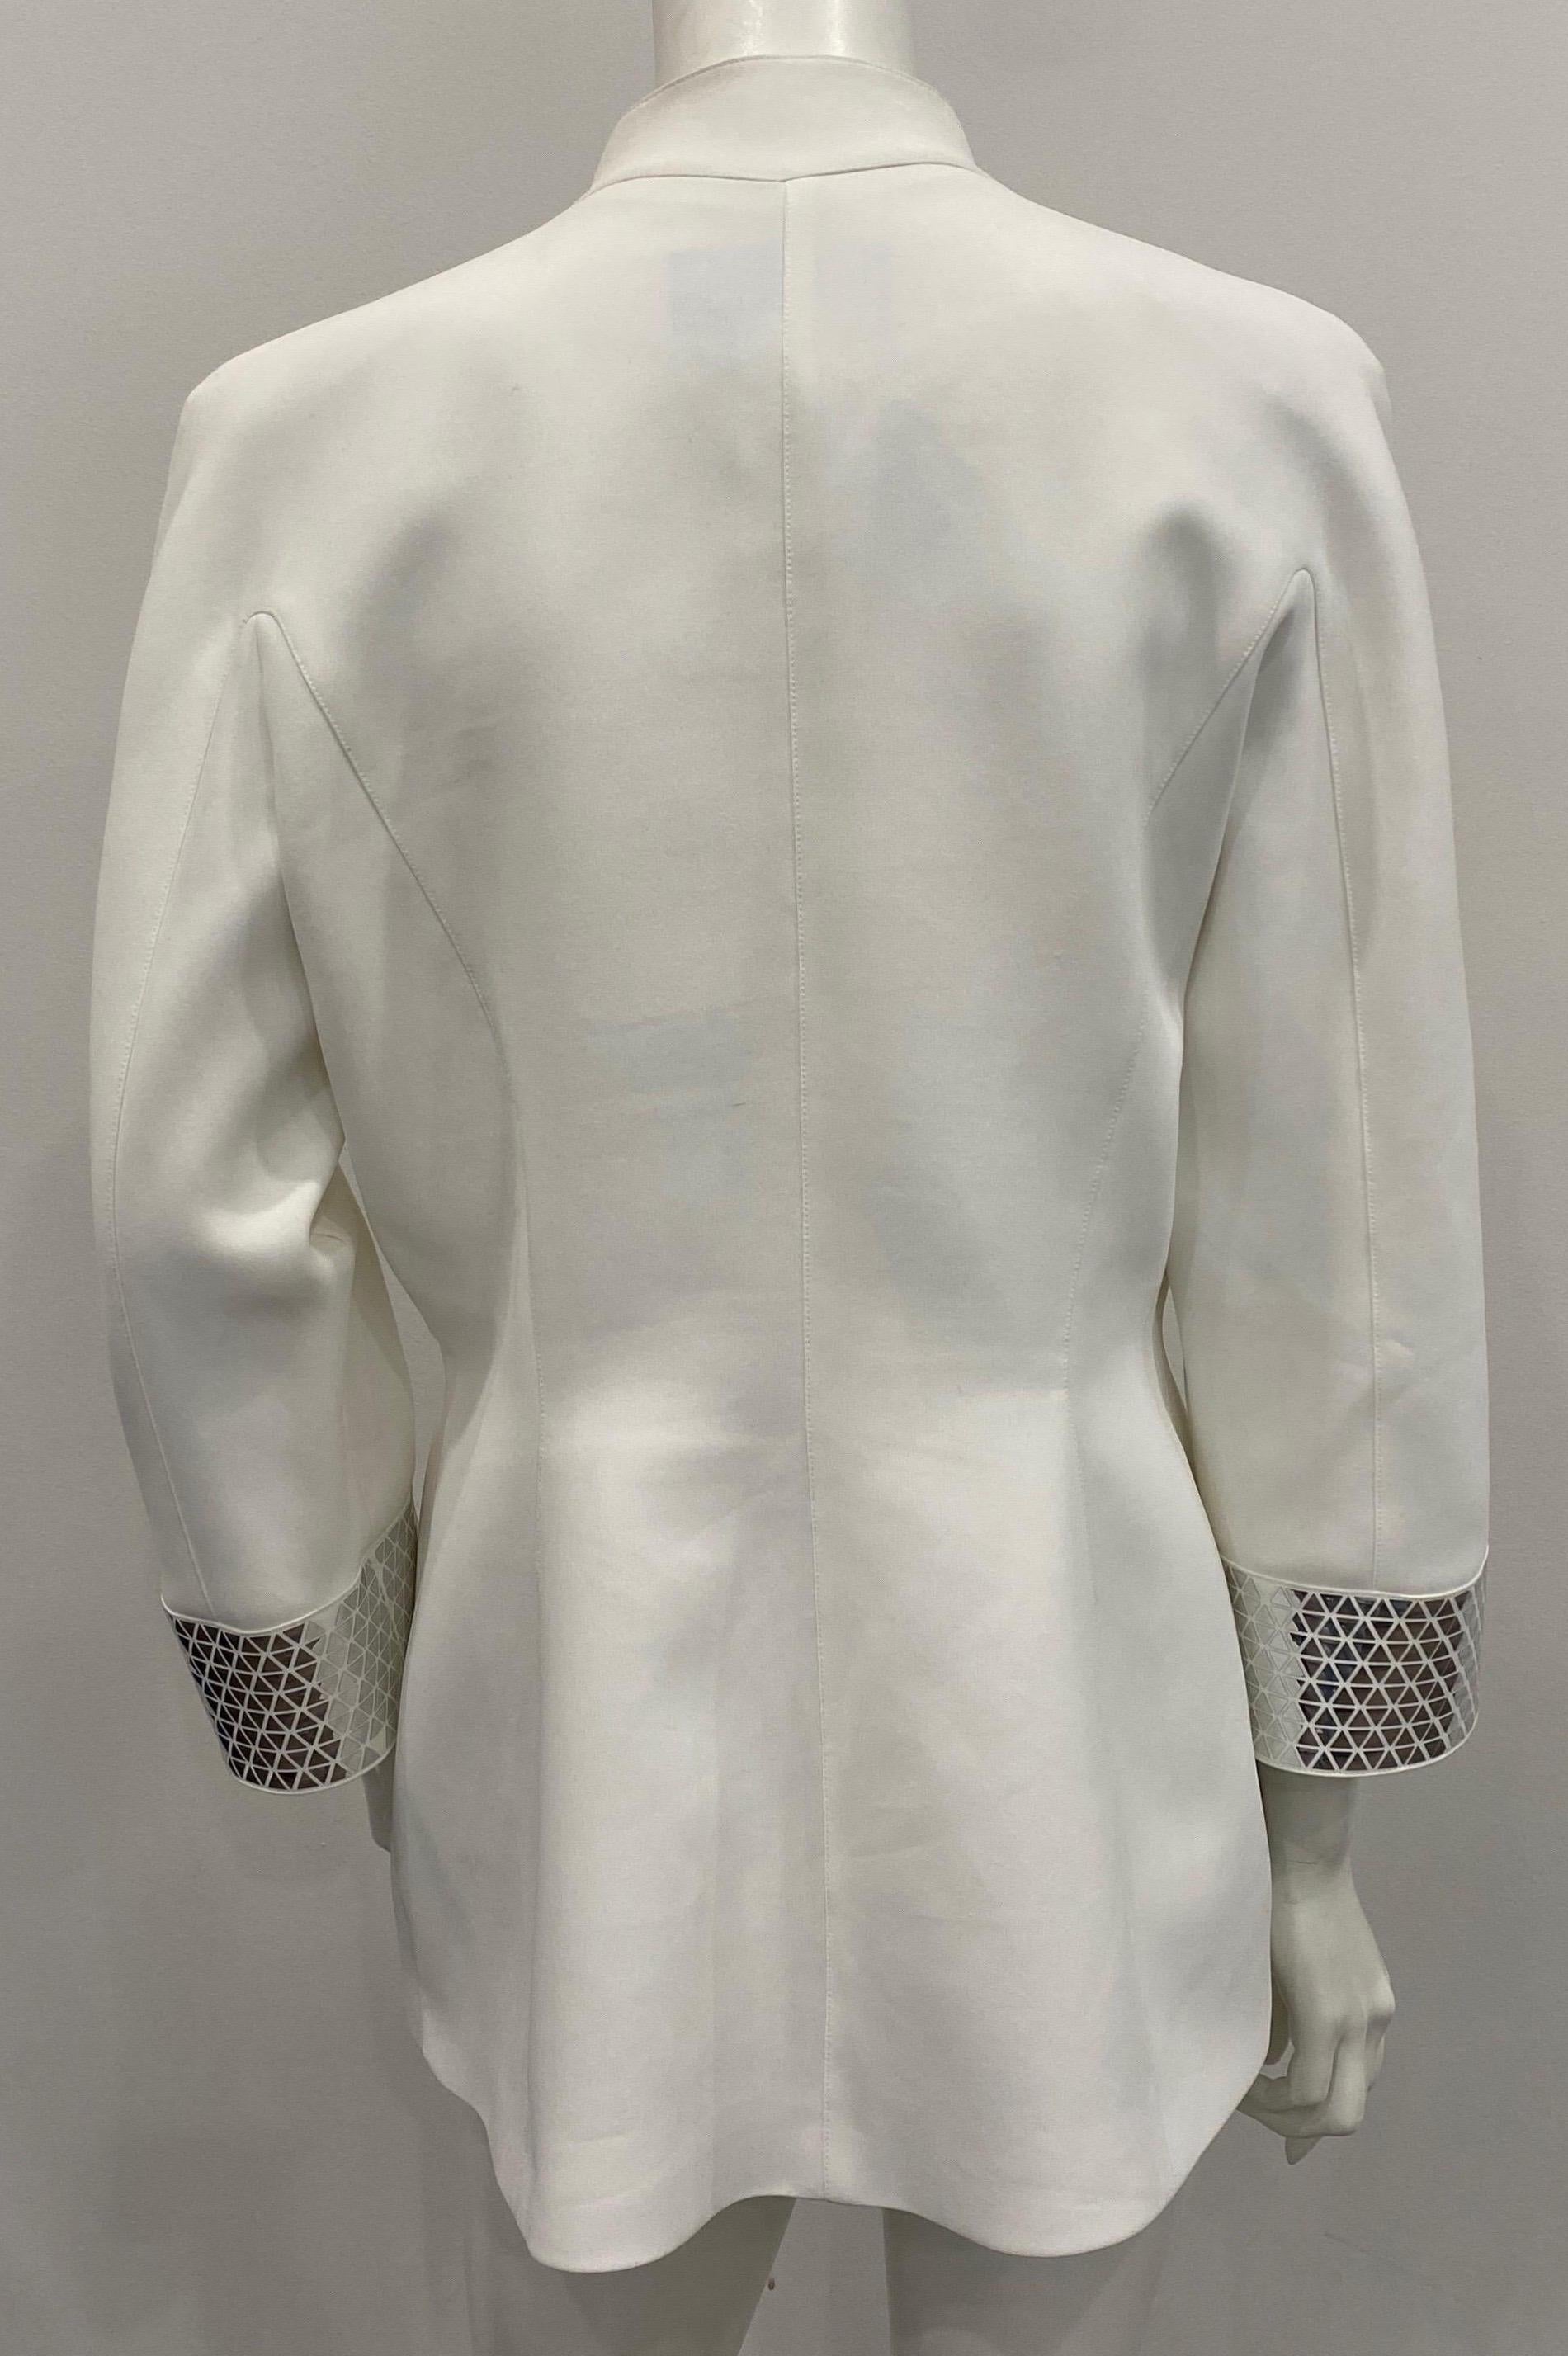 Thierry Mugler Couture 1990s White Jacket with Silver metallic details - Size 46 For Sale 4